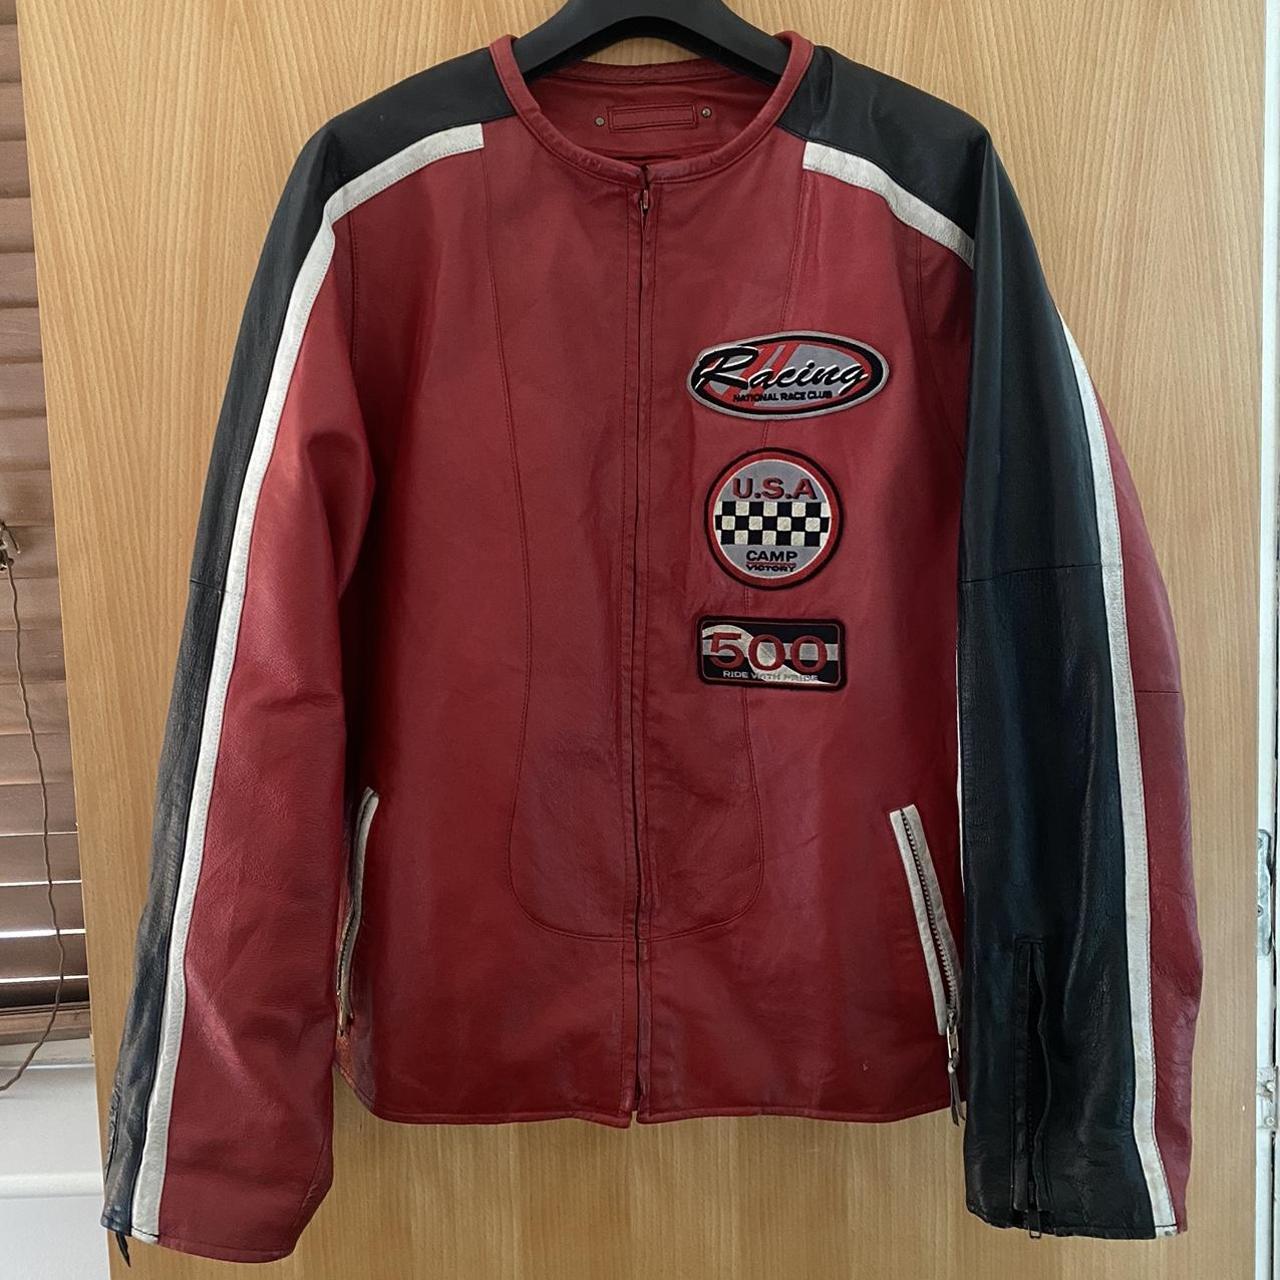 Marcia collection leather motorcycle jacket - Depop